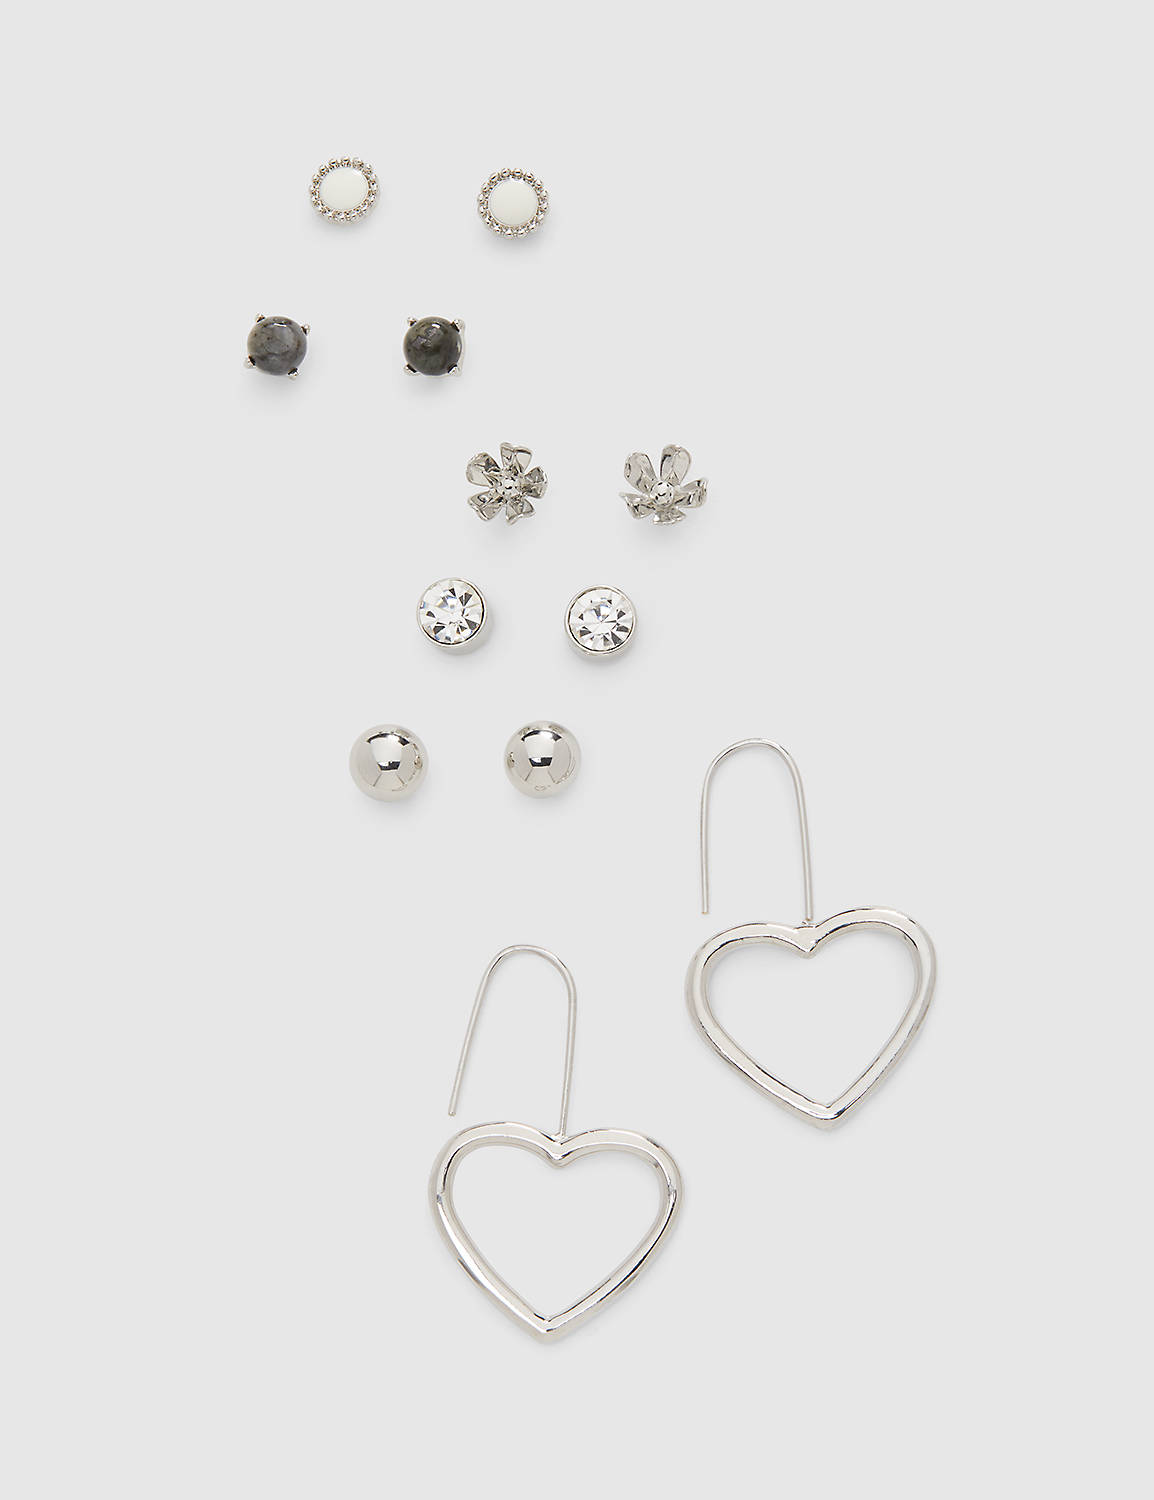 MIXED DELICATE 6 PK EARRING Product Image 1